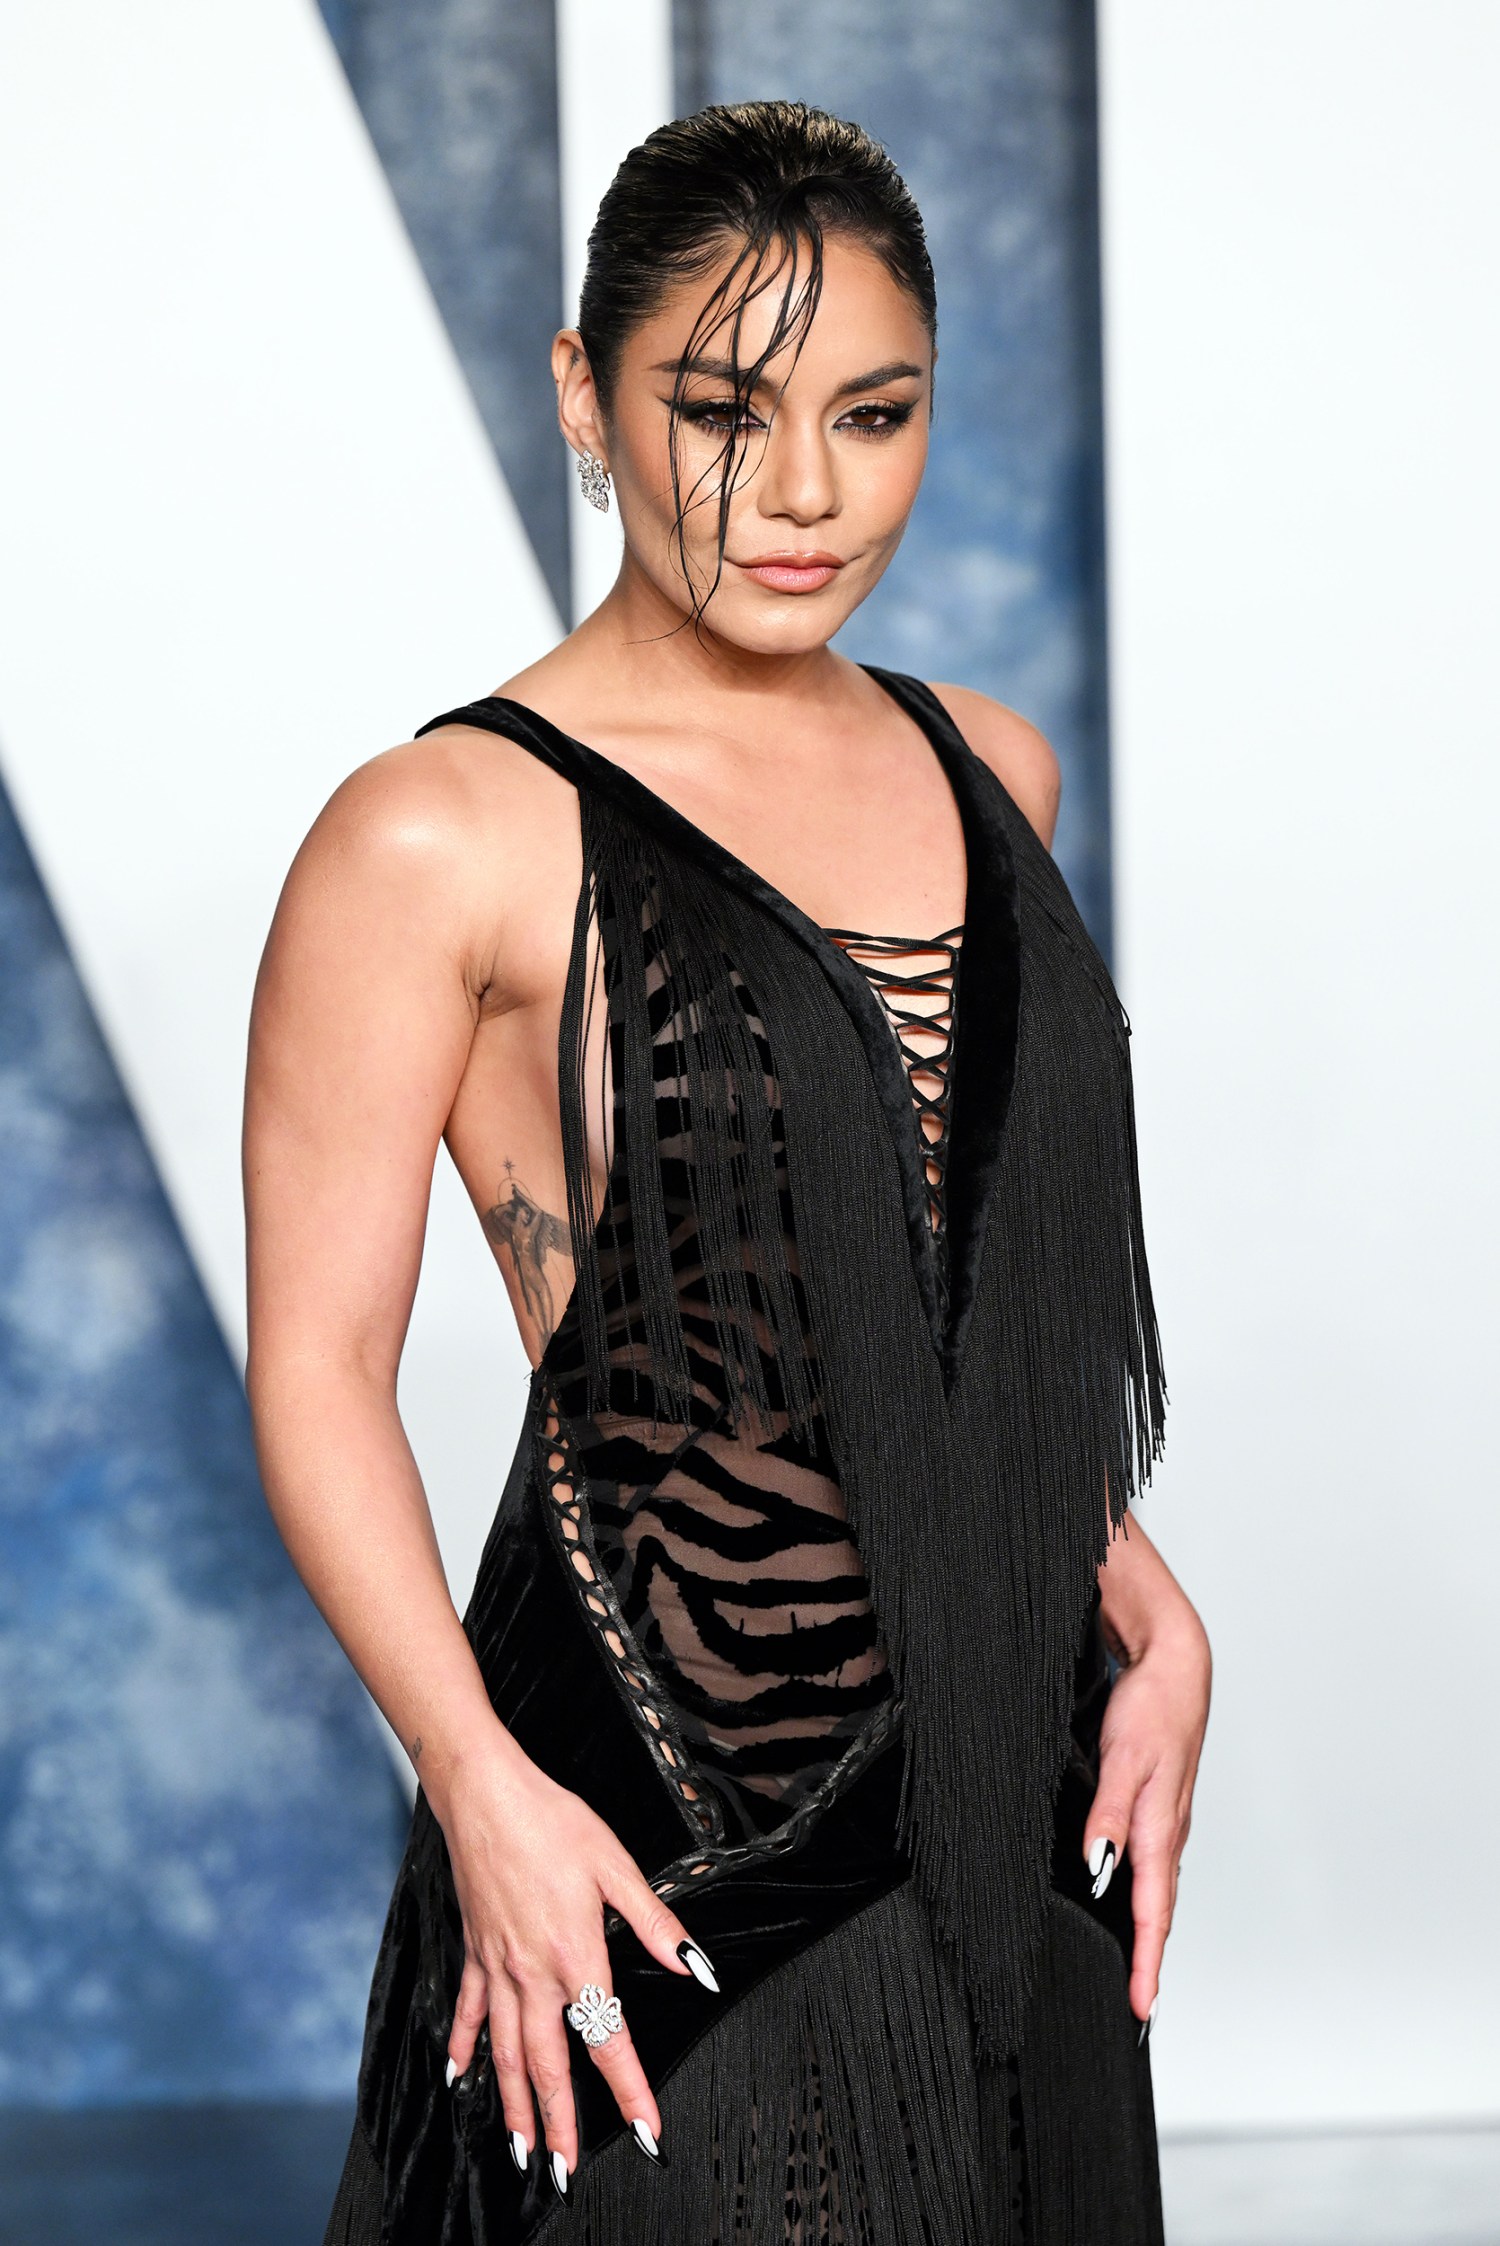 Why Vanessa Hudgens Is Embracing The Title 'Witch'